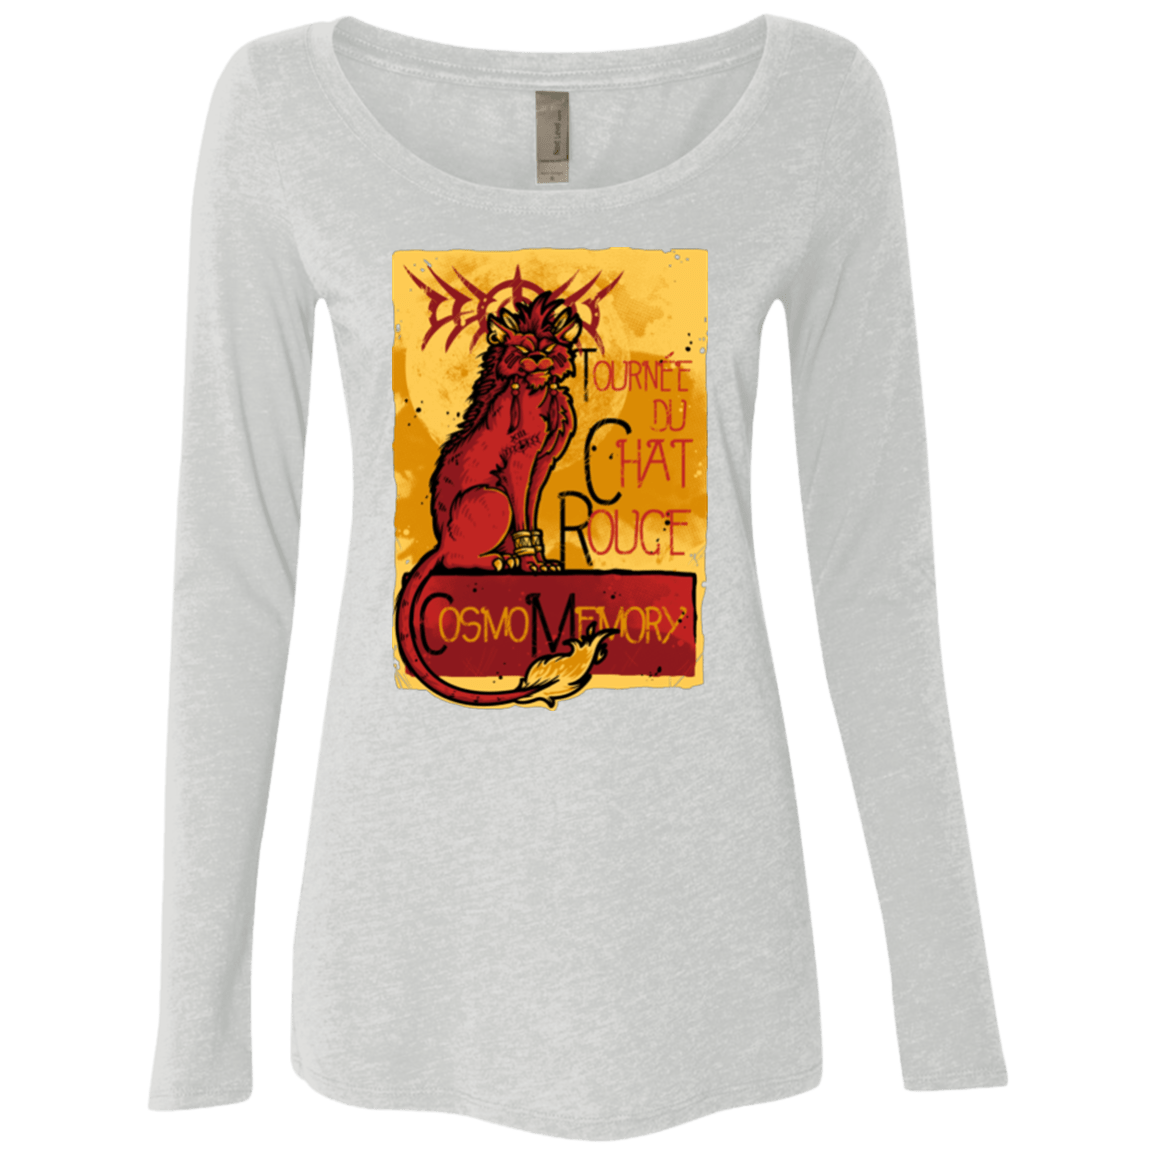 LE CHAT ROUGE Women's Triblend Long Sleeve Shirt